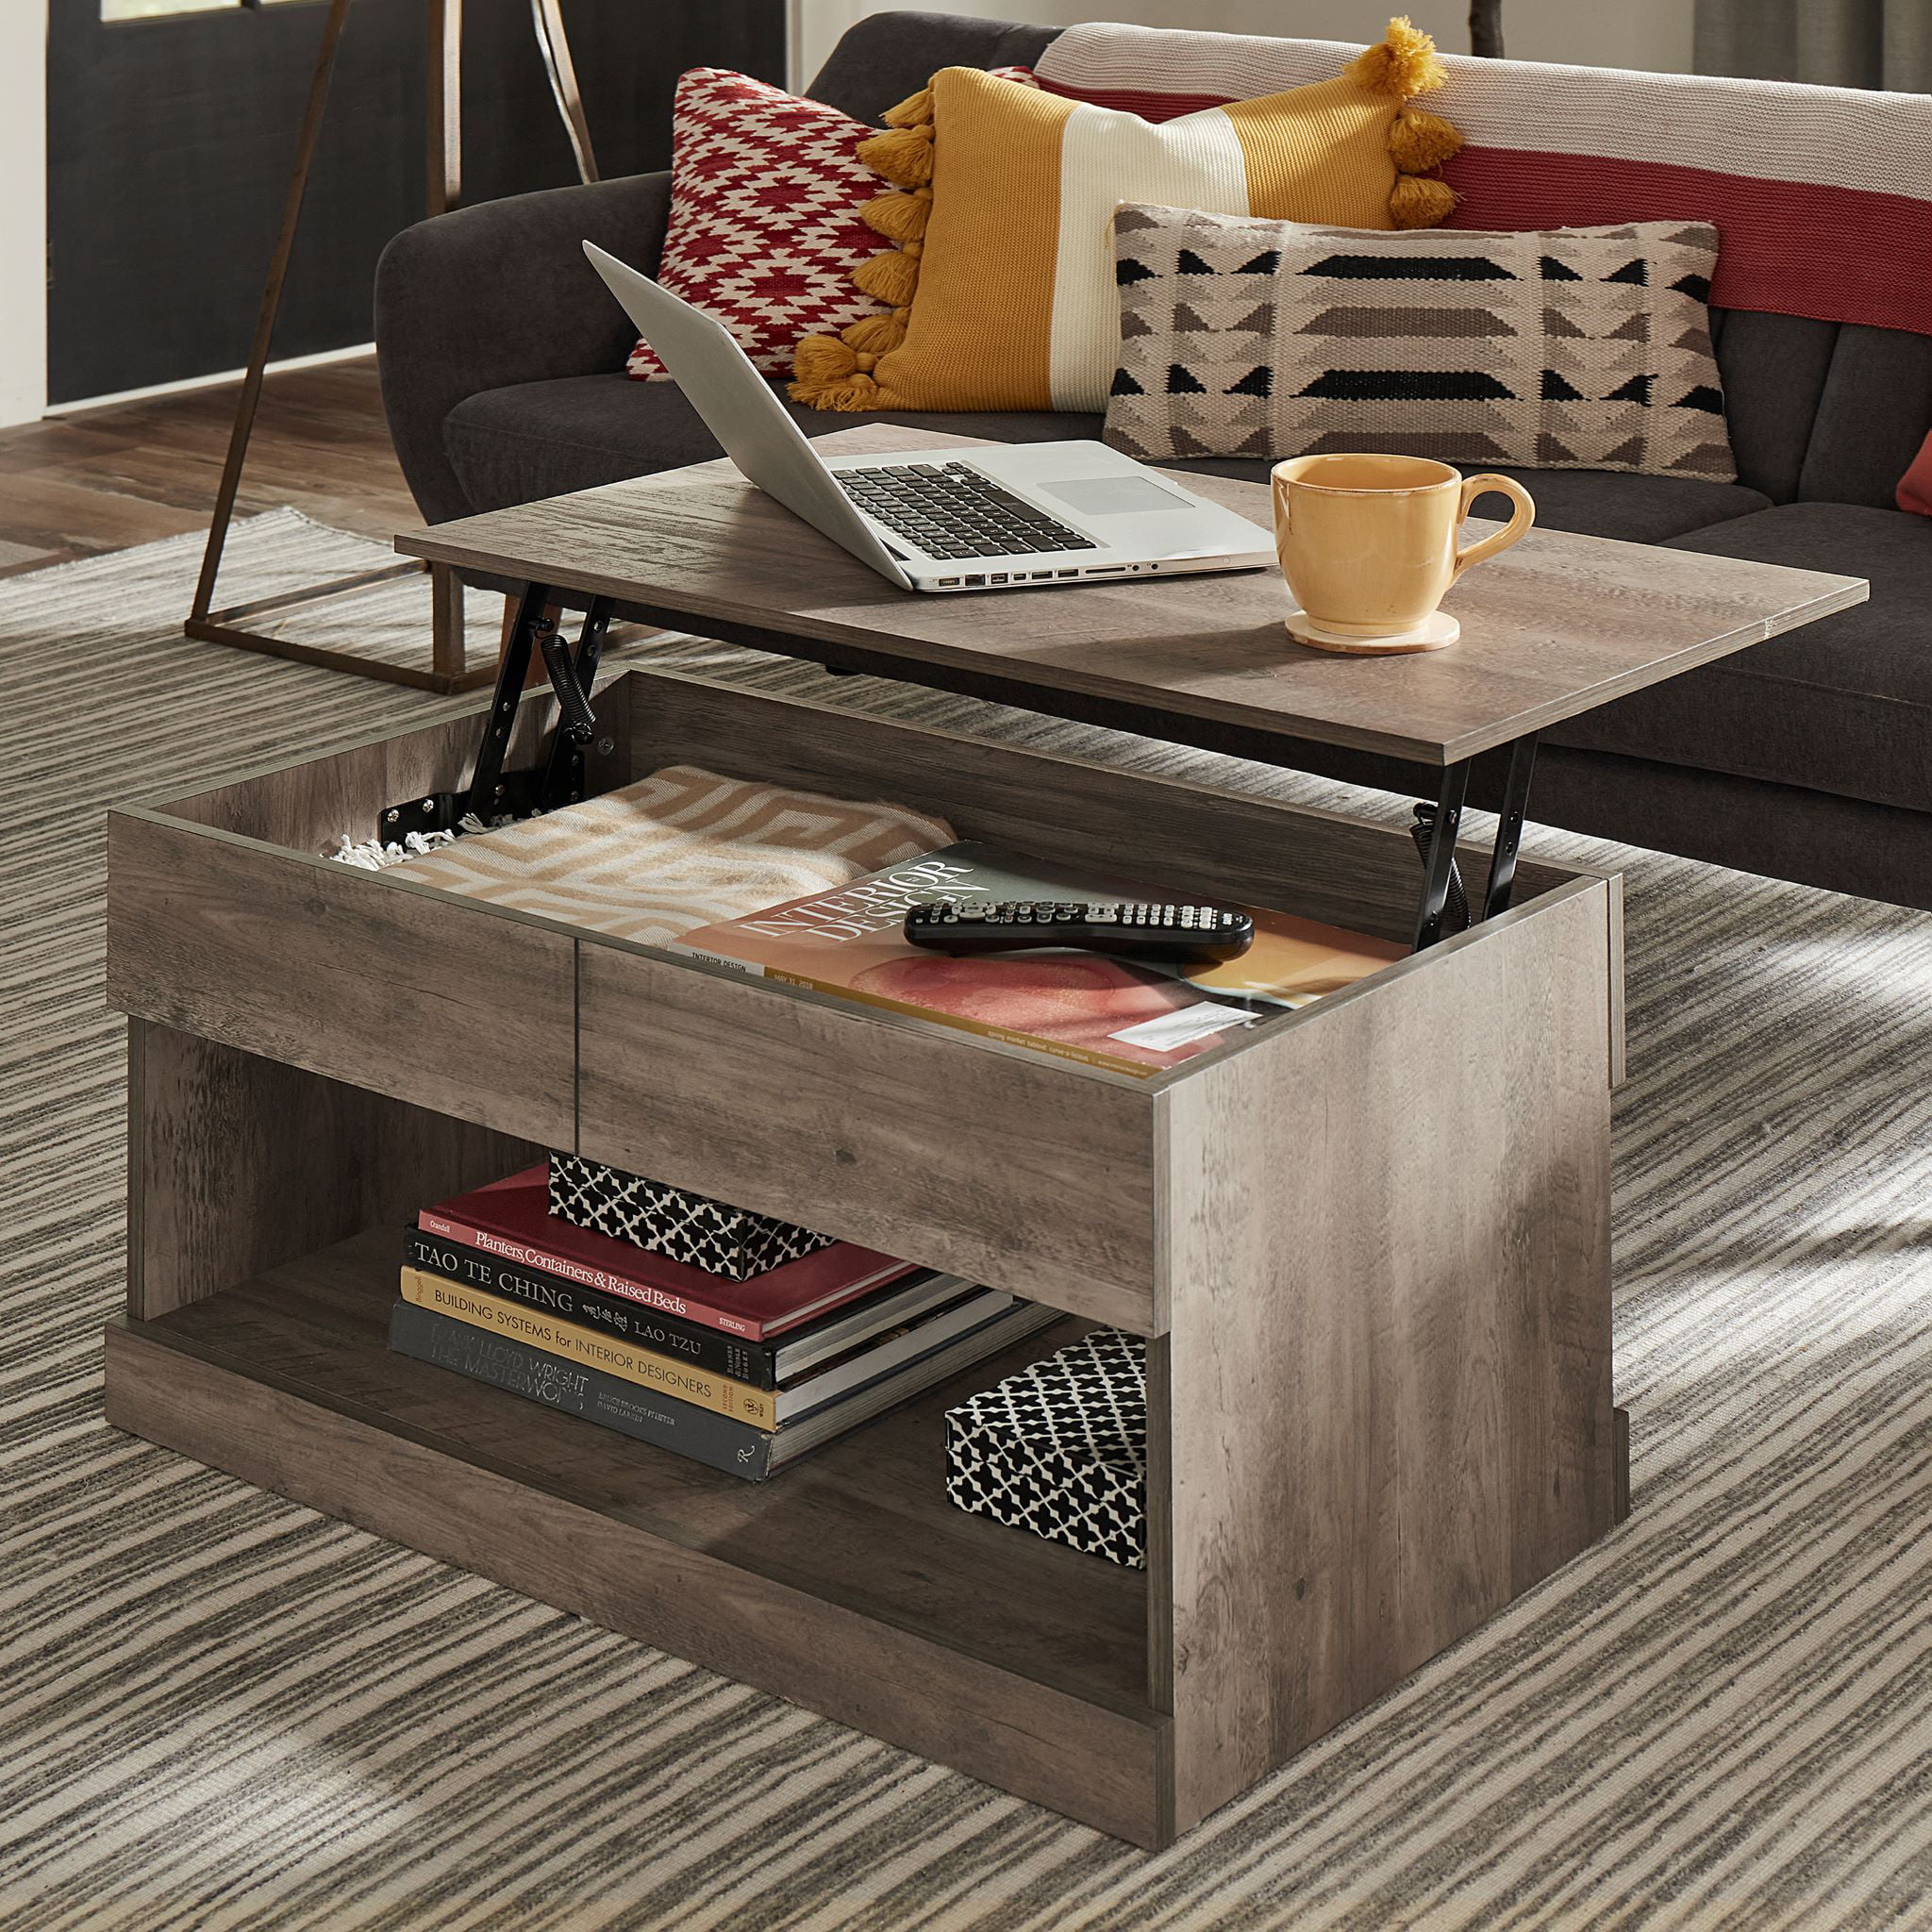 Brindle Rectangular Lift Top Coffee Table, Gray Oak, by Hillsdale Living Essentials - image 1 of 22